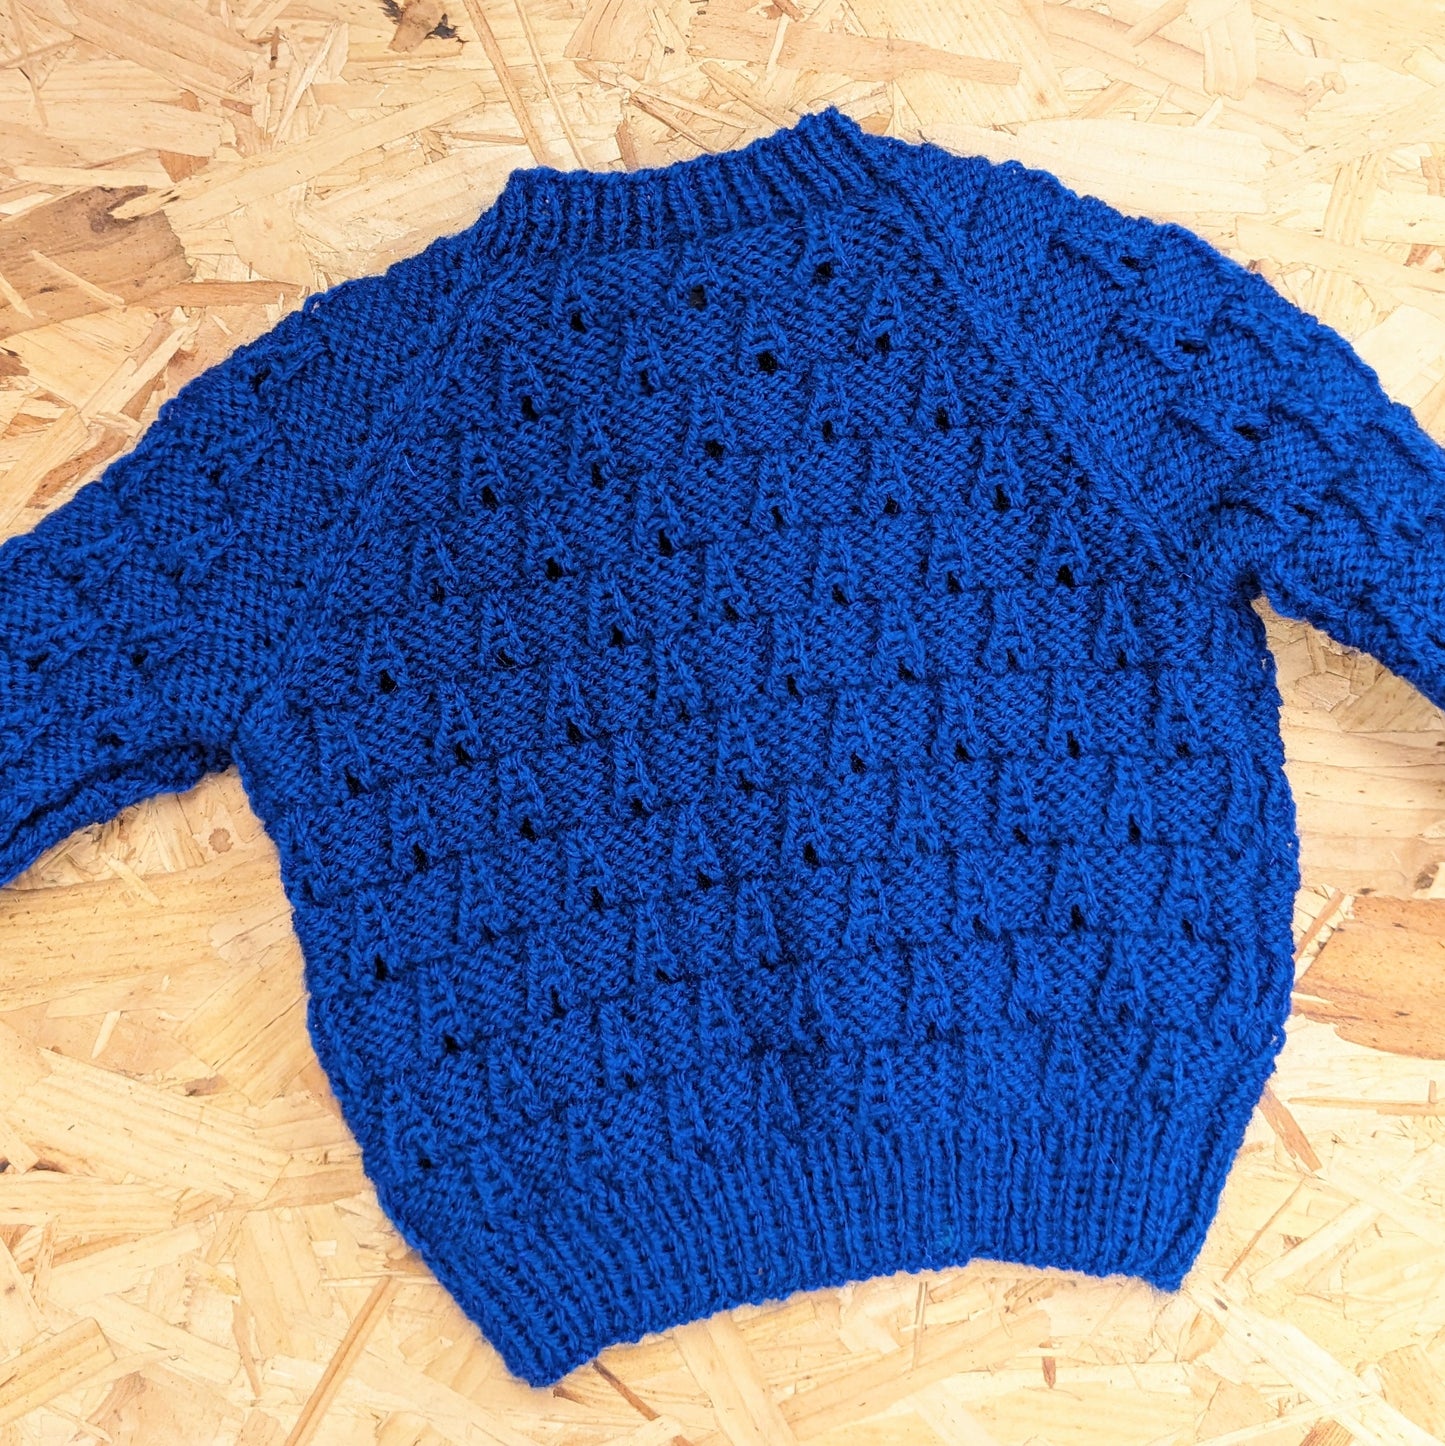 Electric blue knitted cardigan 6-9 months